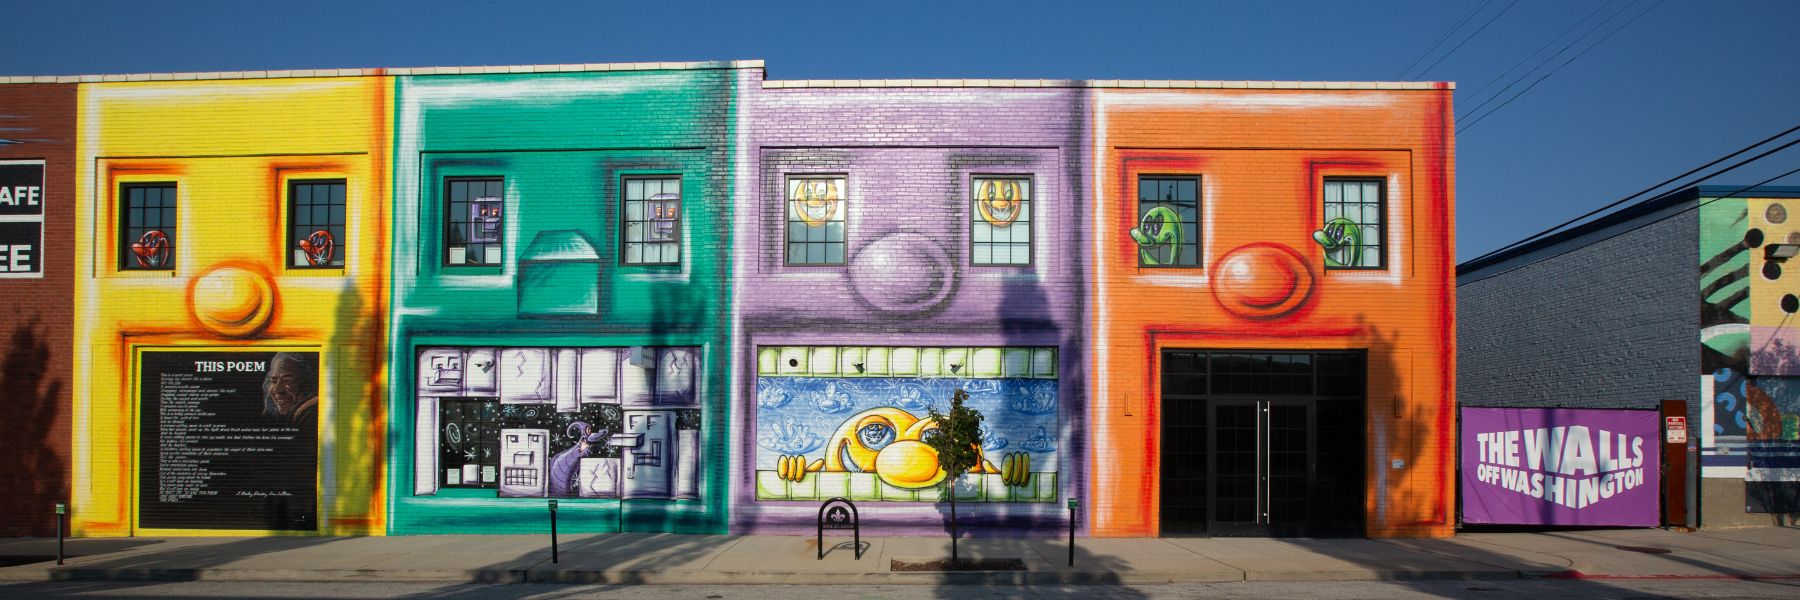 Part of The Walls Off Washington, Kranzbergville, a mural by Kenny Scharf, features four brightly colored buildings that resemble animated faces.